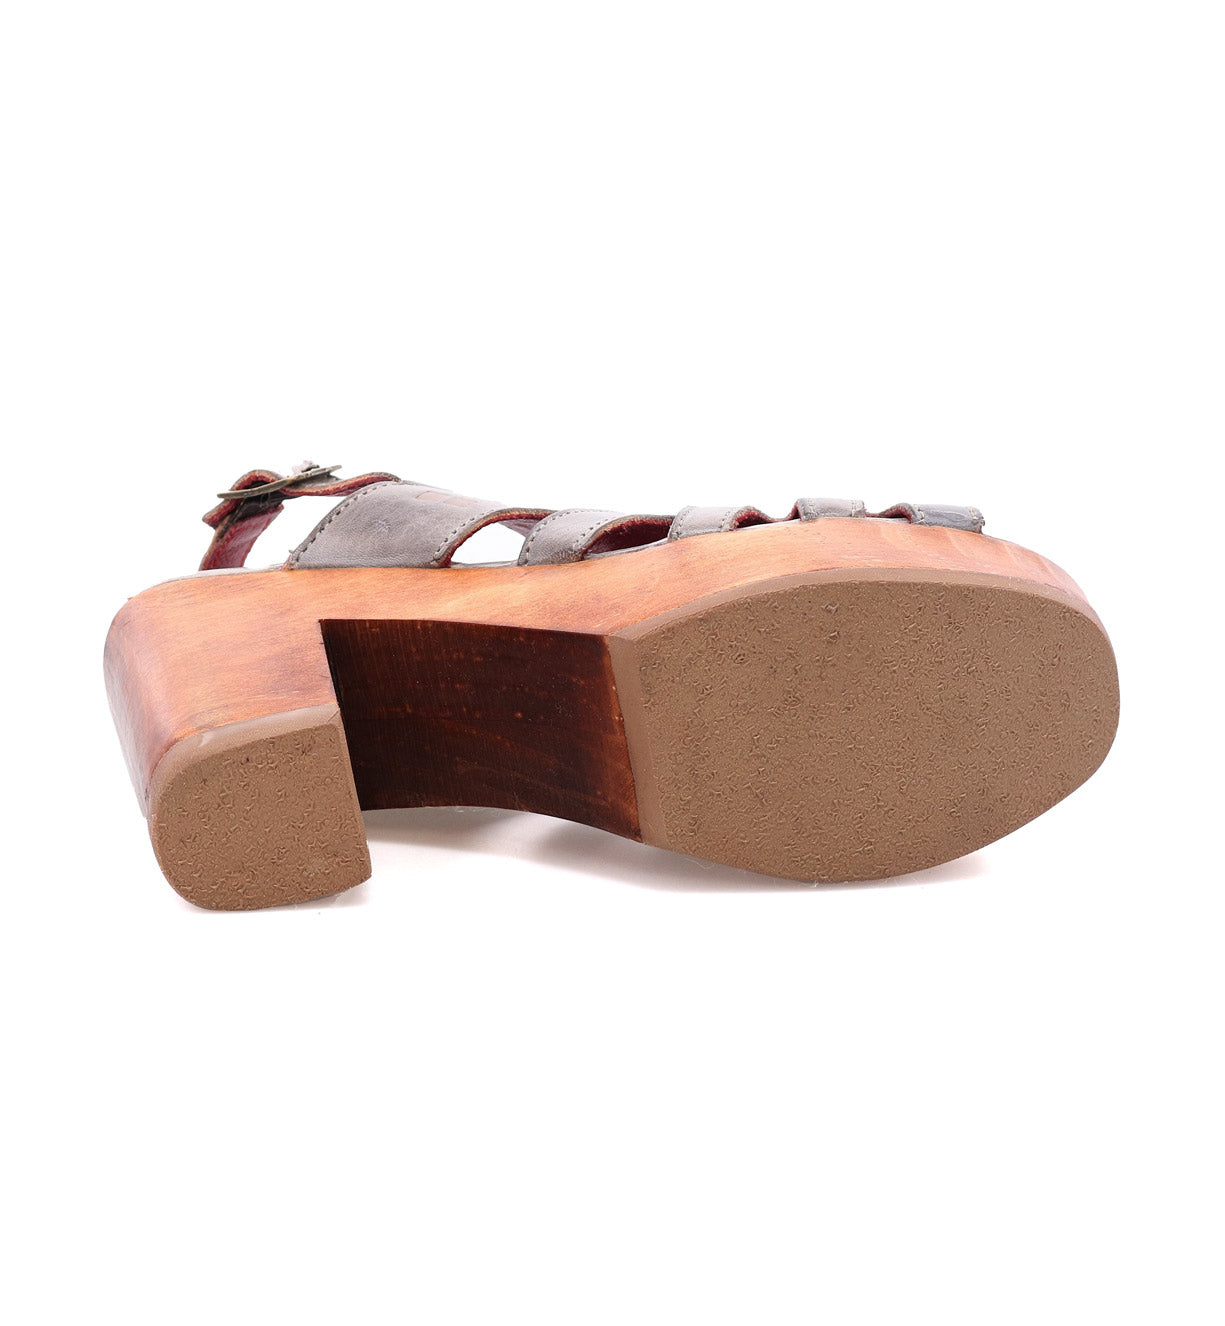 A pair of Fontella women's sandals with a wooden sole by Bed Stu.